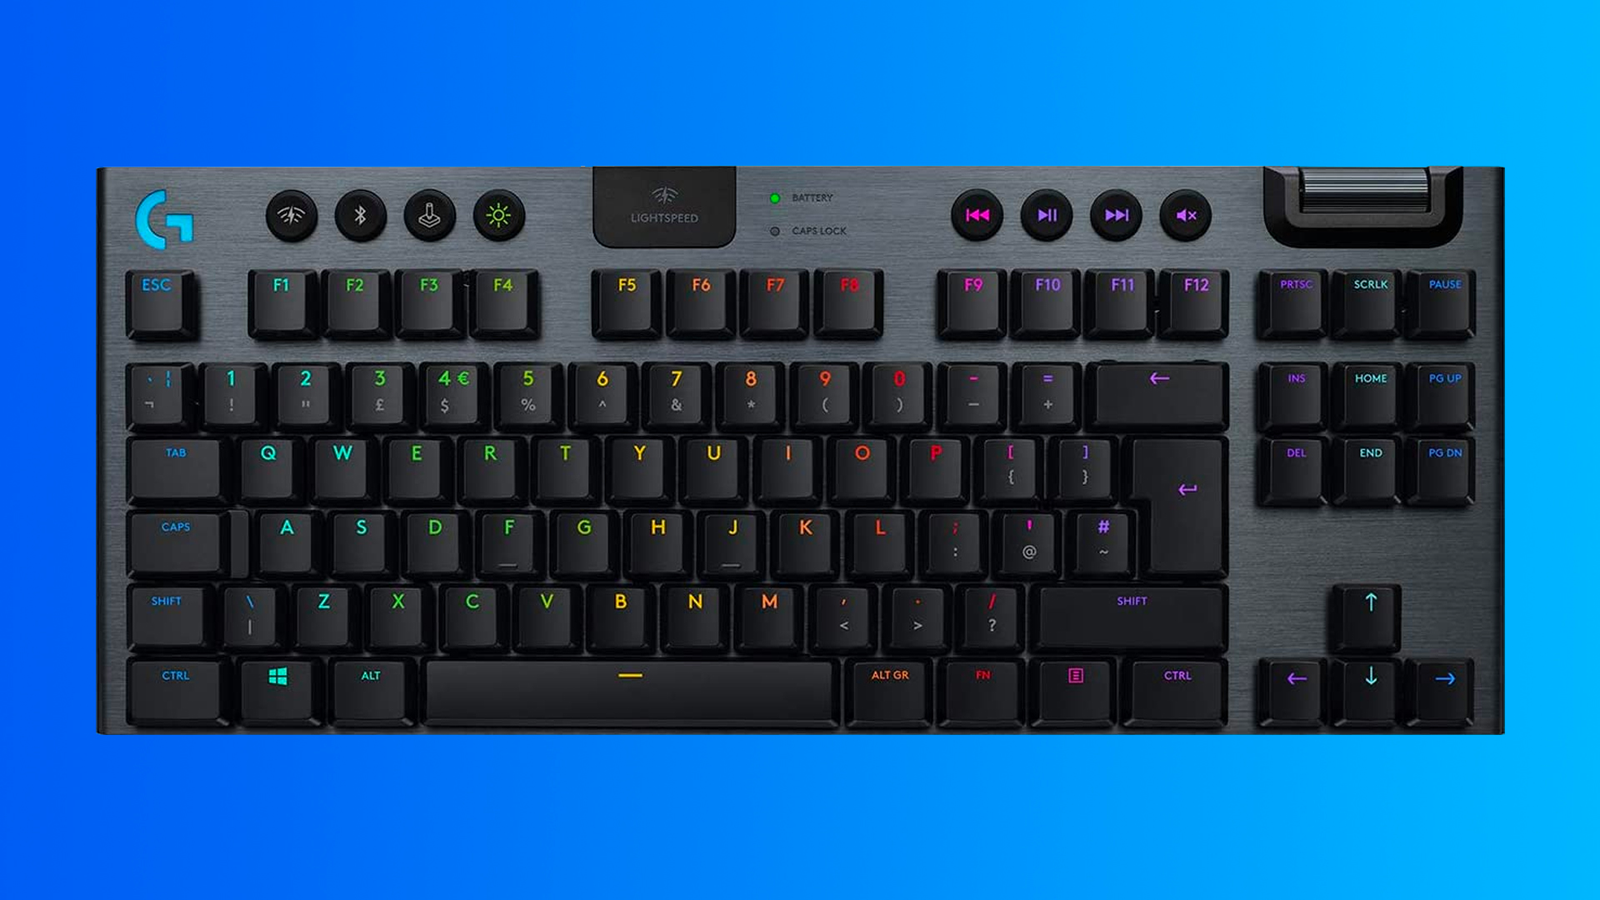 Grab the excellent Logitech G915 TKL keyboard for just £109 in the